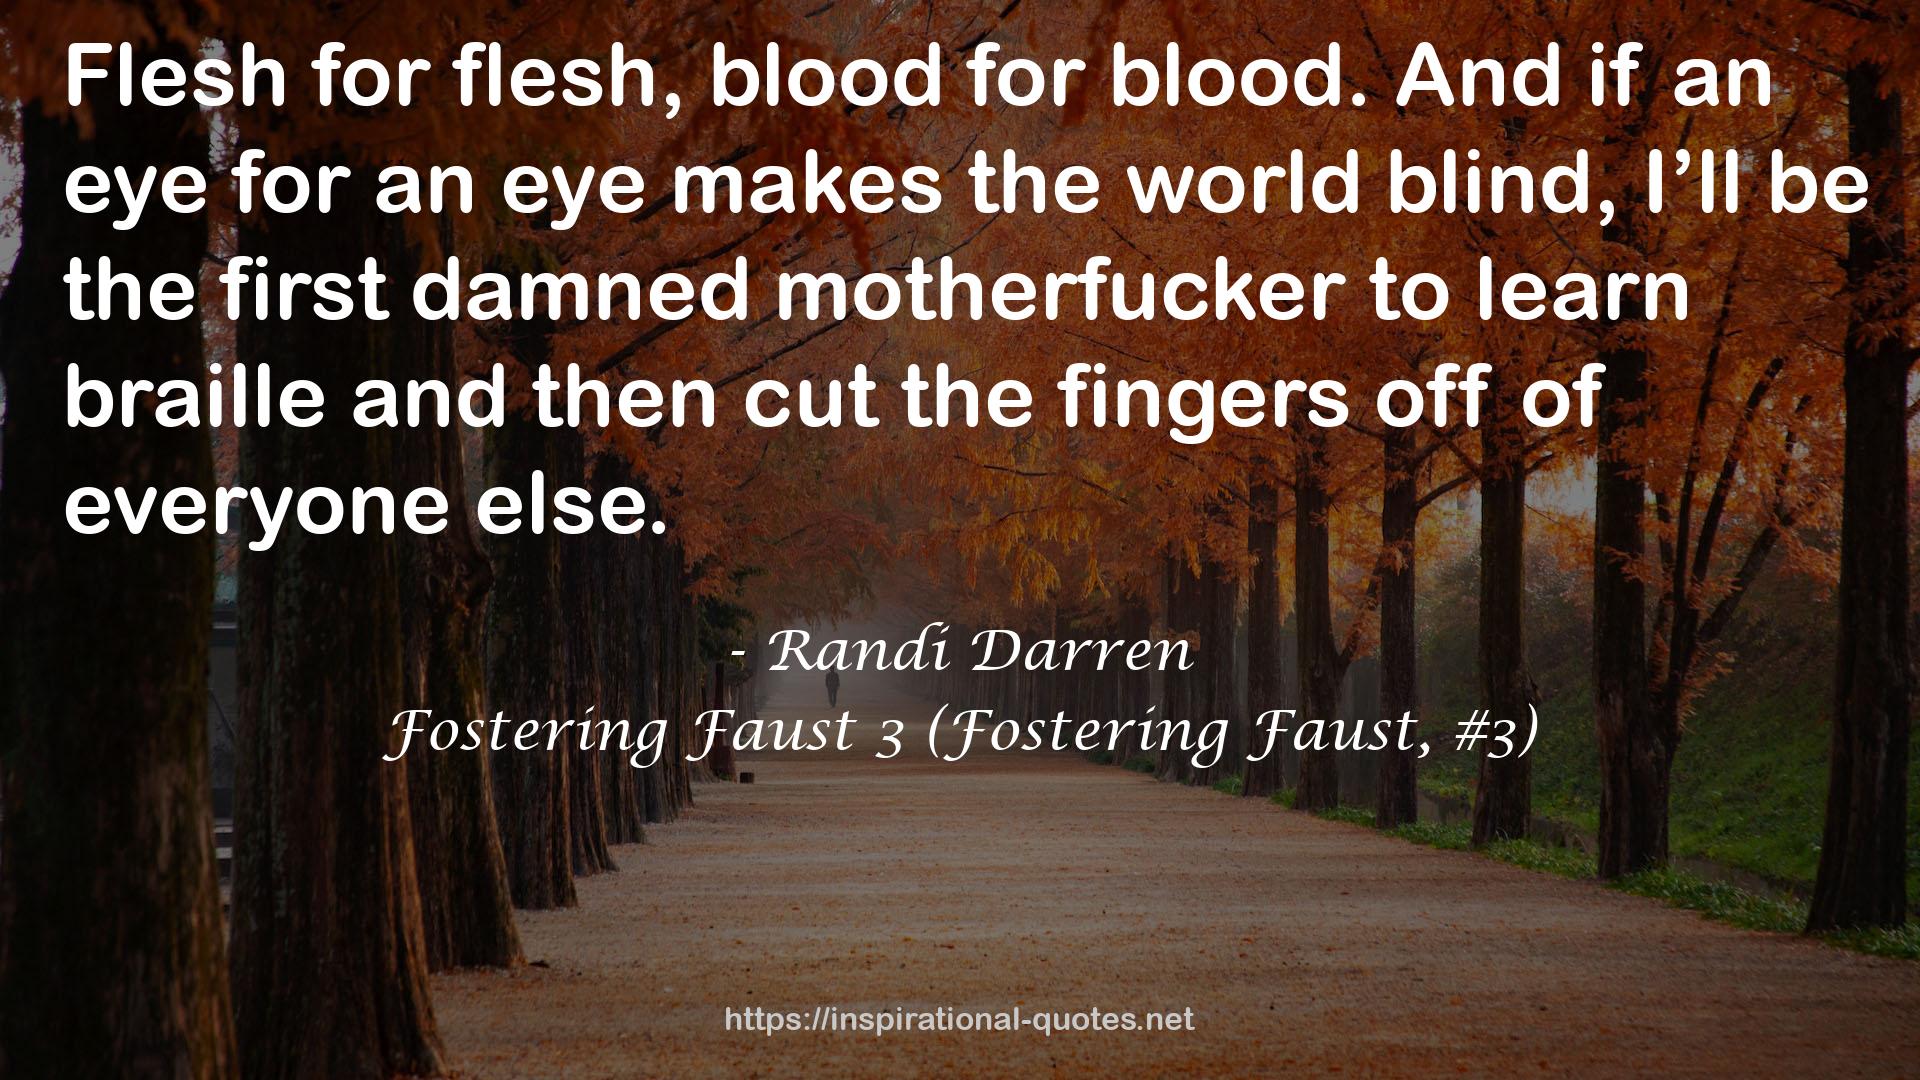 Fostering Faust 3 (Fostering Faust, #3) QUOTES